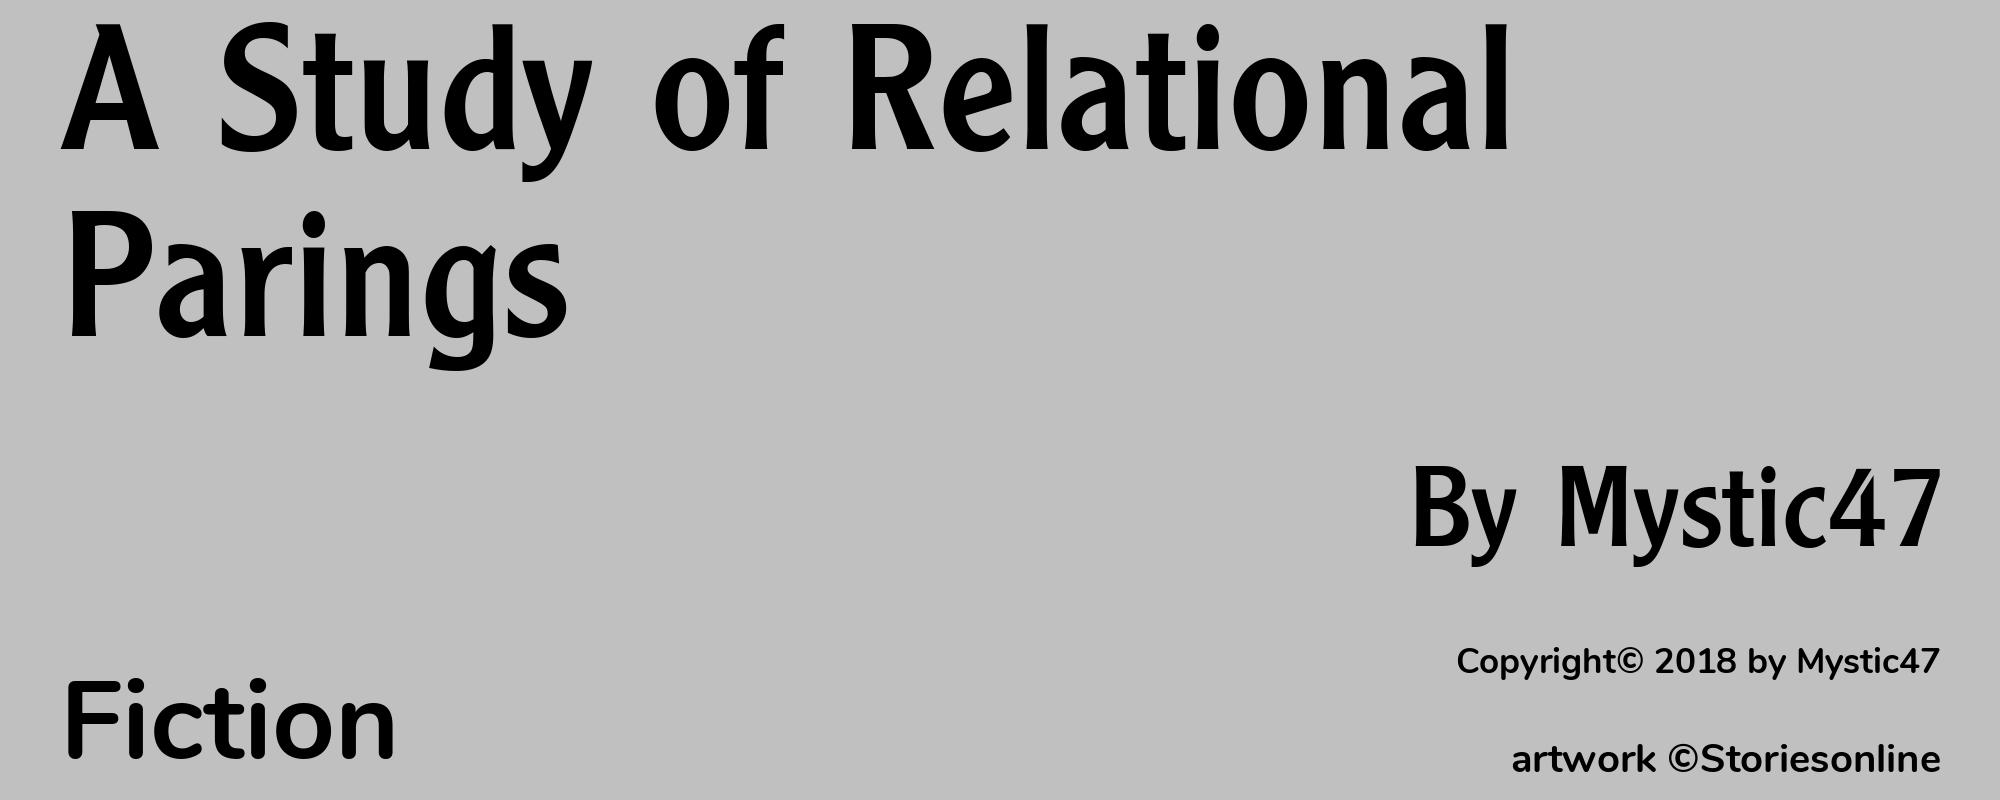 A Study of Relational Parings - Cover